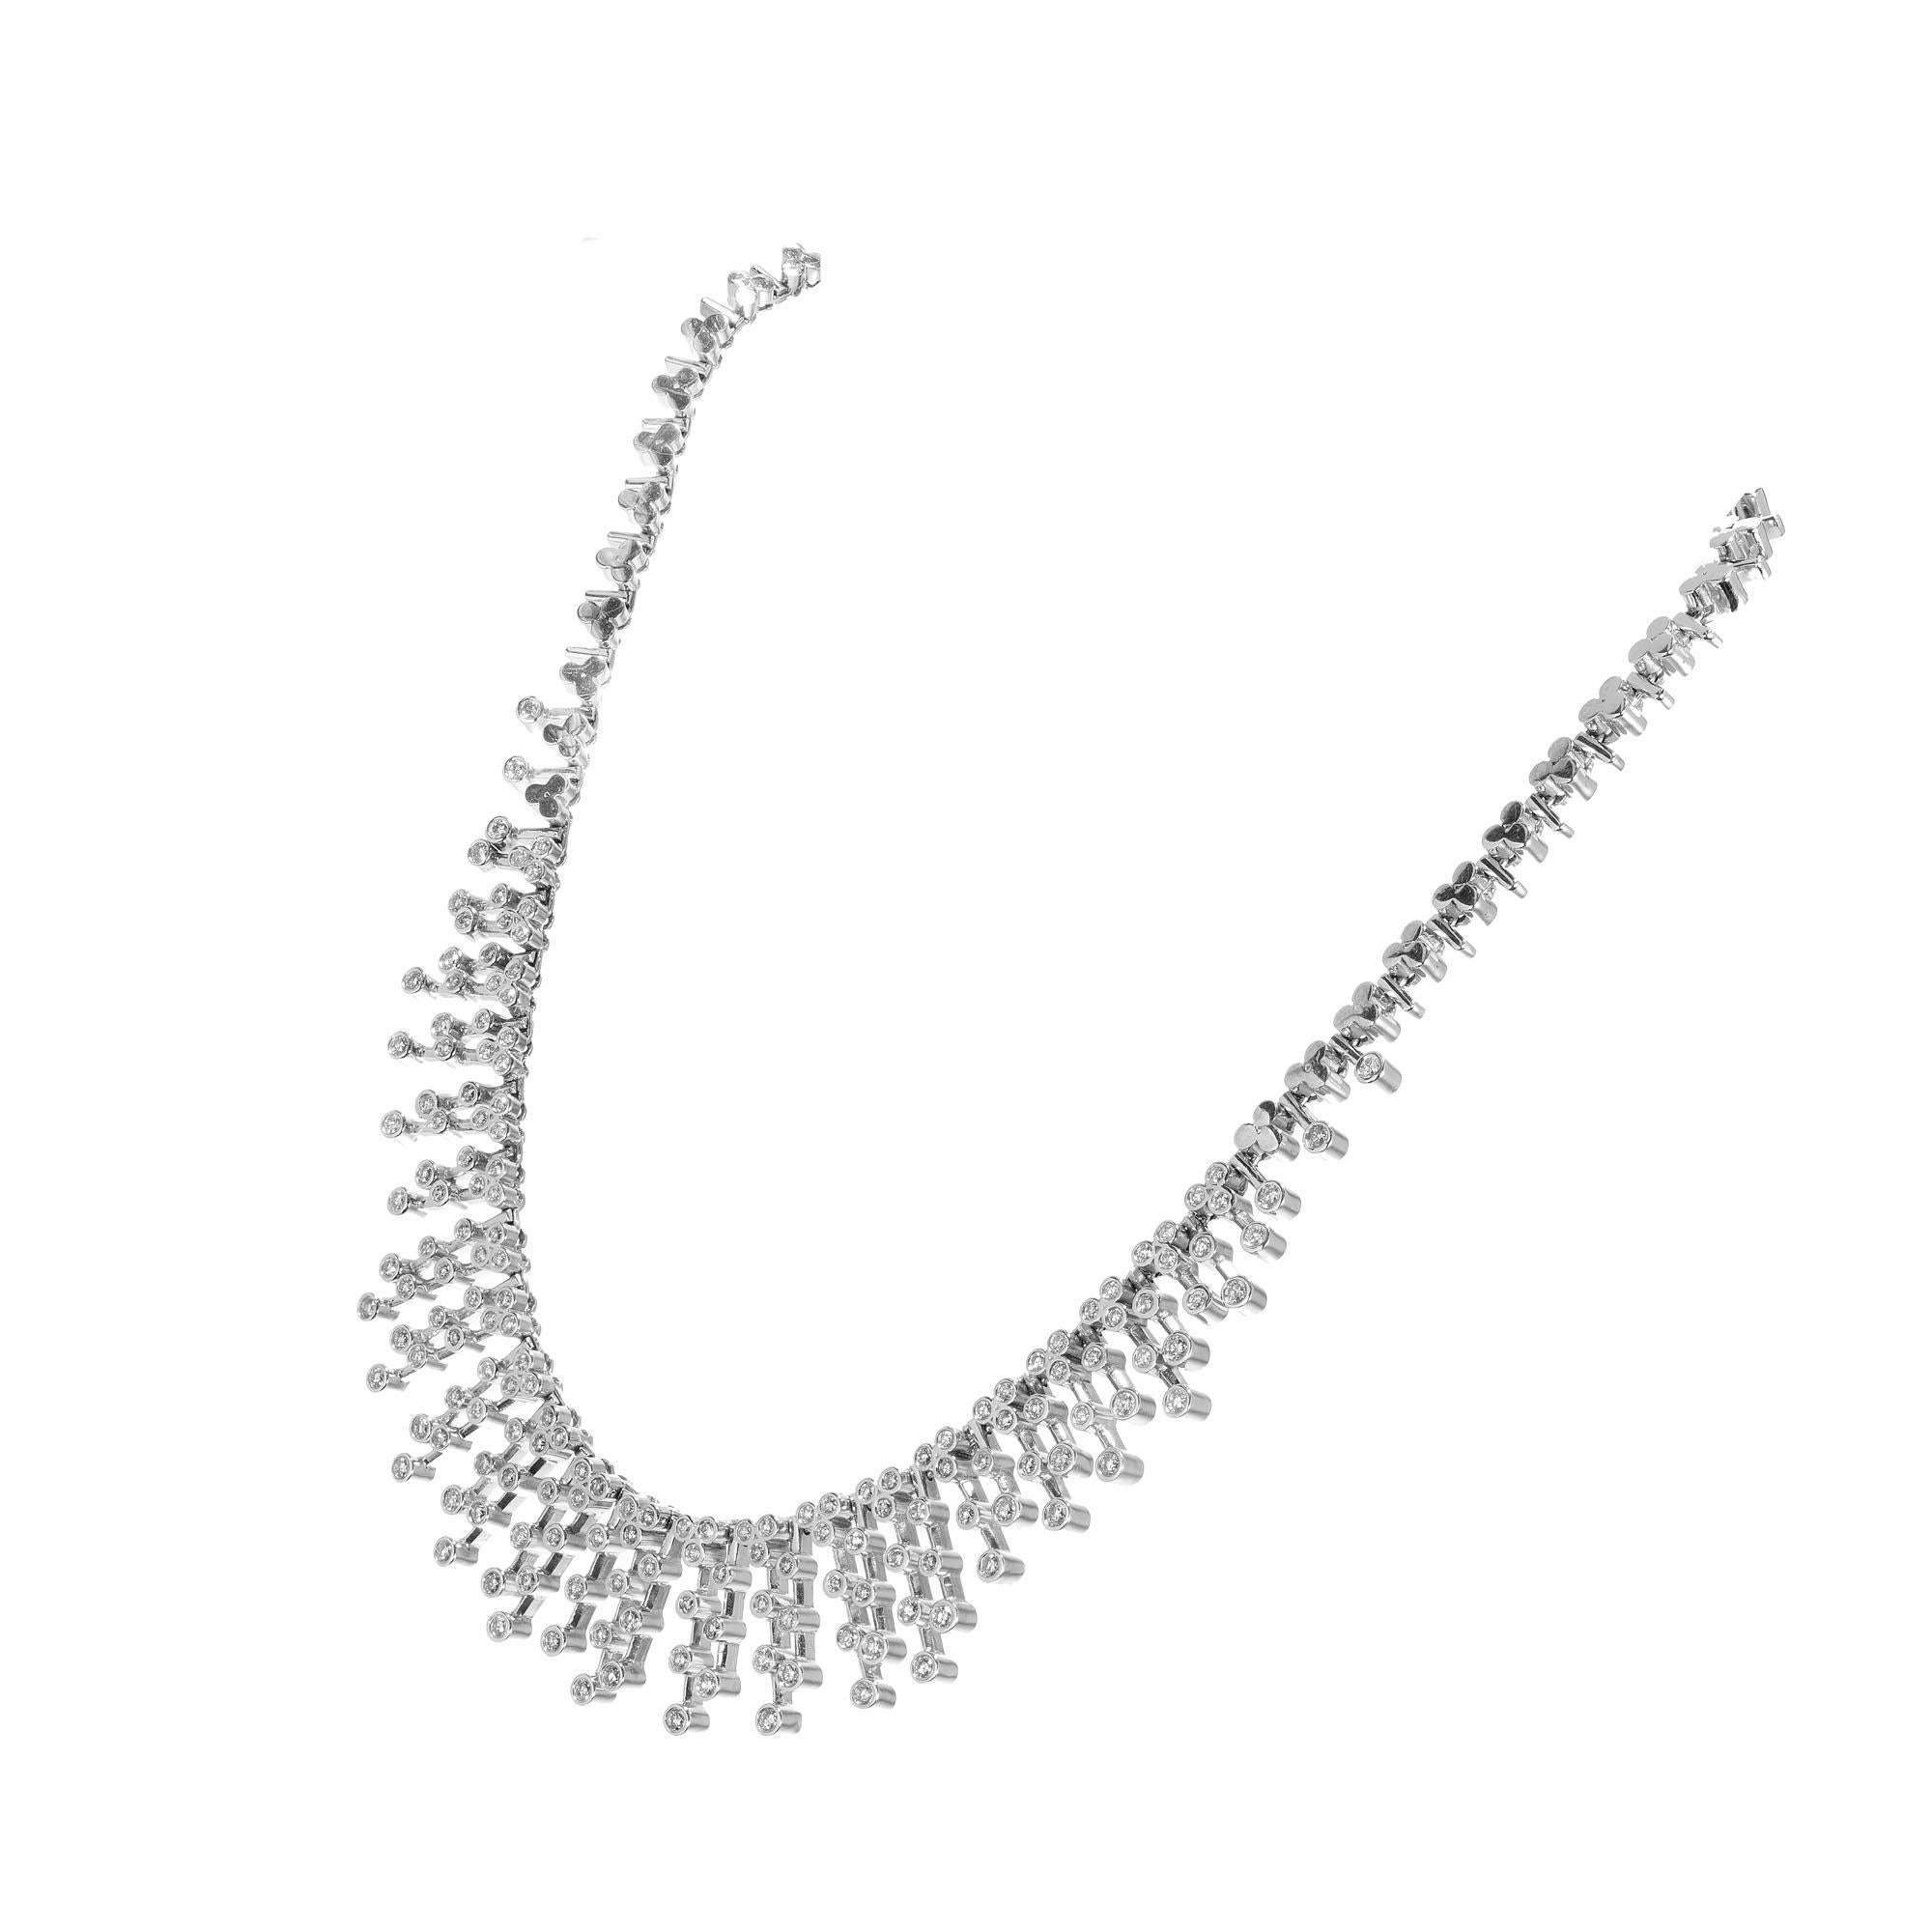 4.00 carat diamond Cleopatra graduated style necklace in 18k white gold  

175 round brilliant cut diamonds G SI, approx. 4.00cts
18k white gold 
Stamped: 750
75.1 grams
Width at top: 5.15mm by clasp
Height at top: 3.6mm
Width at bottom: 19.5mm